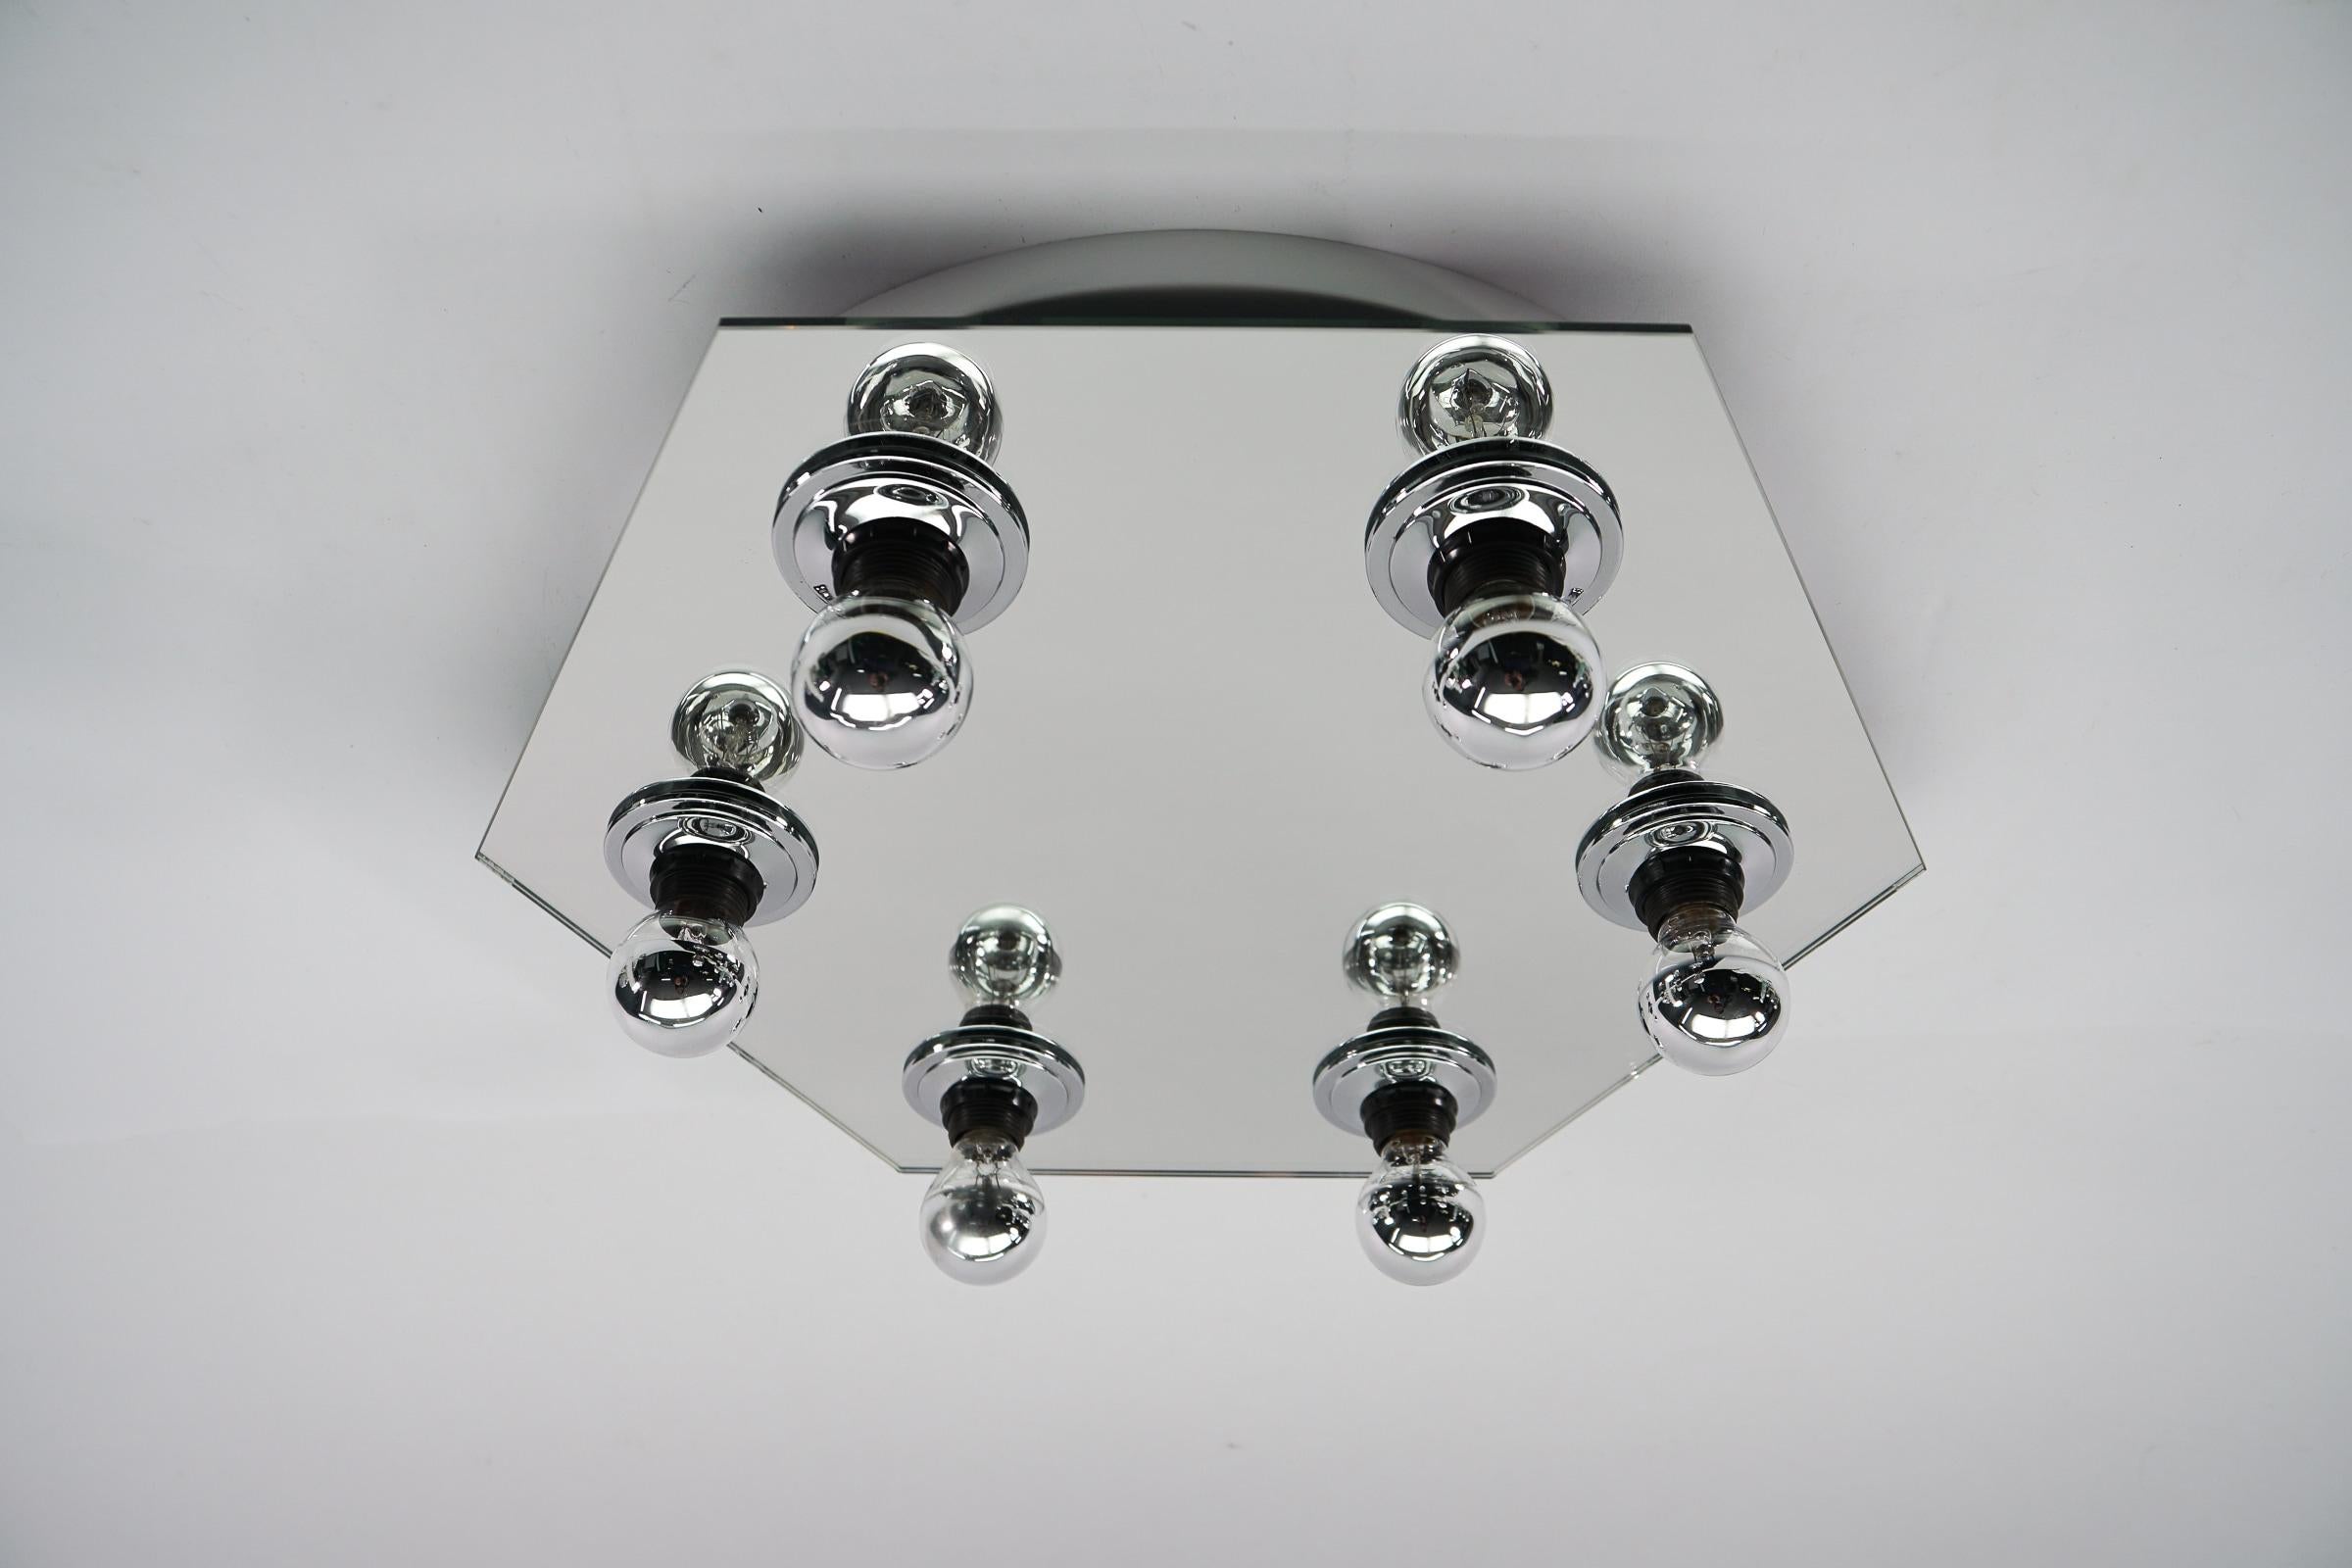 Mid-Century Modern Hexagonal Mirrored Ceiling Lamp With Six Light Bulbs, 1970s Italy For Sale